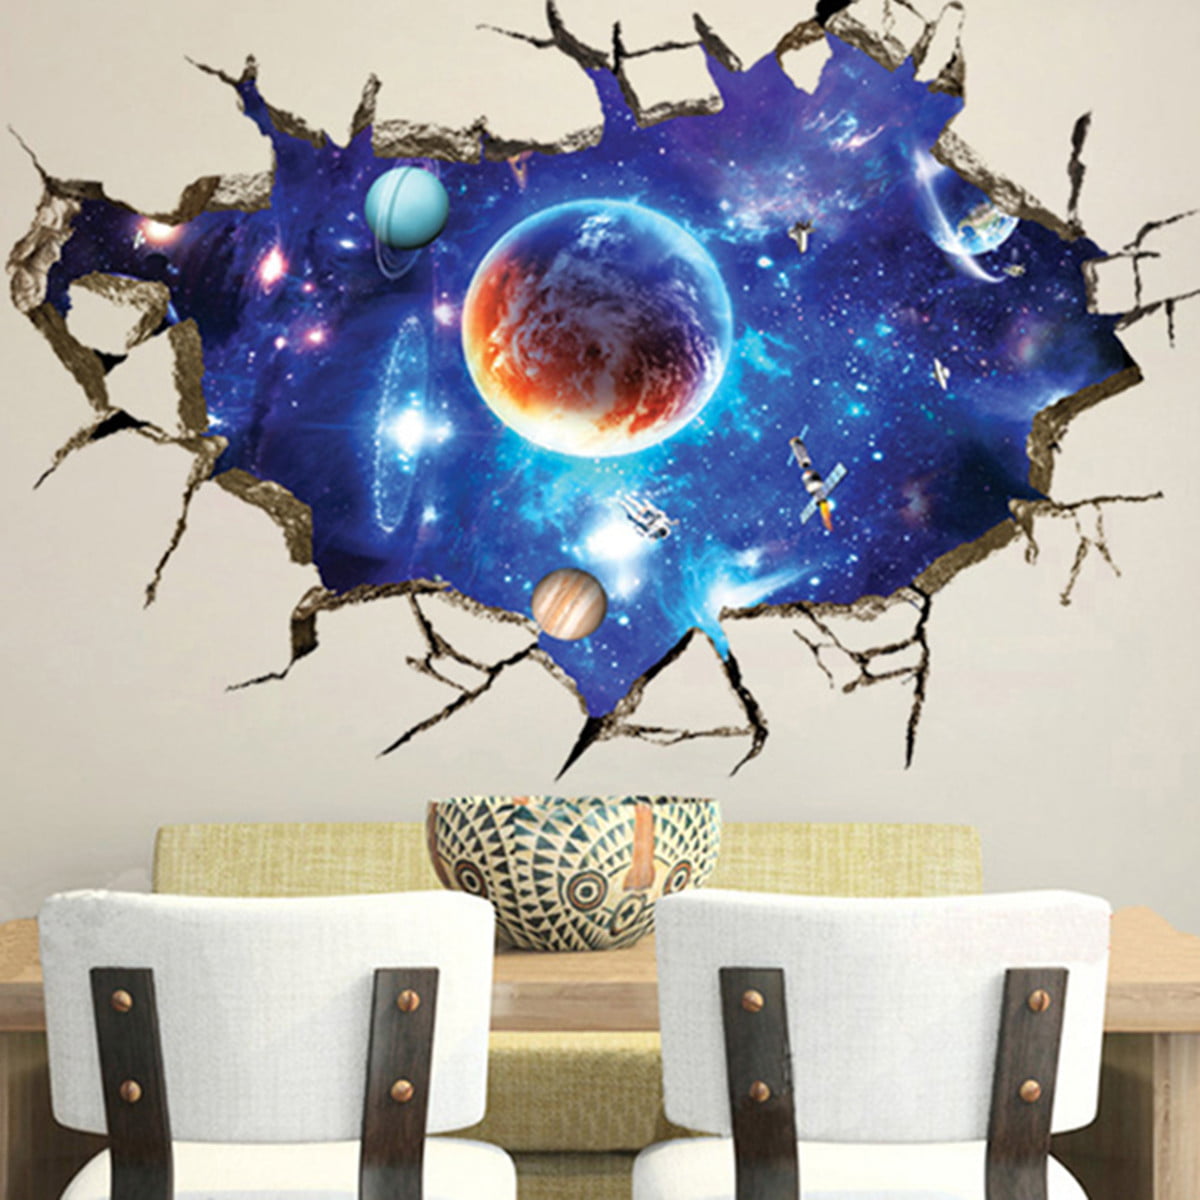 Frifer Wall Stickers Luminous Bedroom New Planets Stickers DIY Decorative for Childrens Bedroom